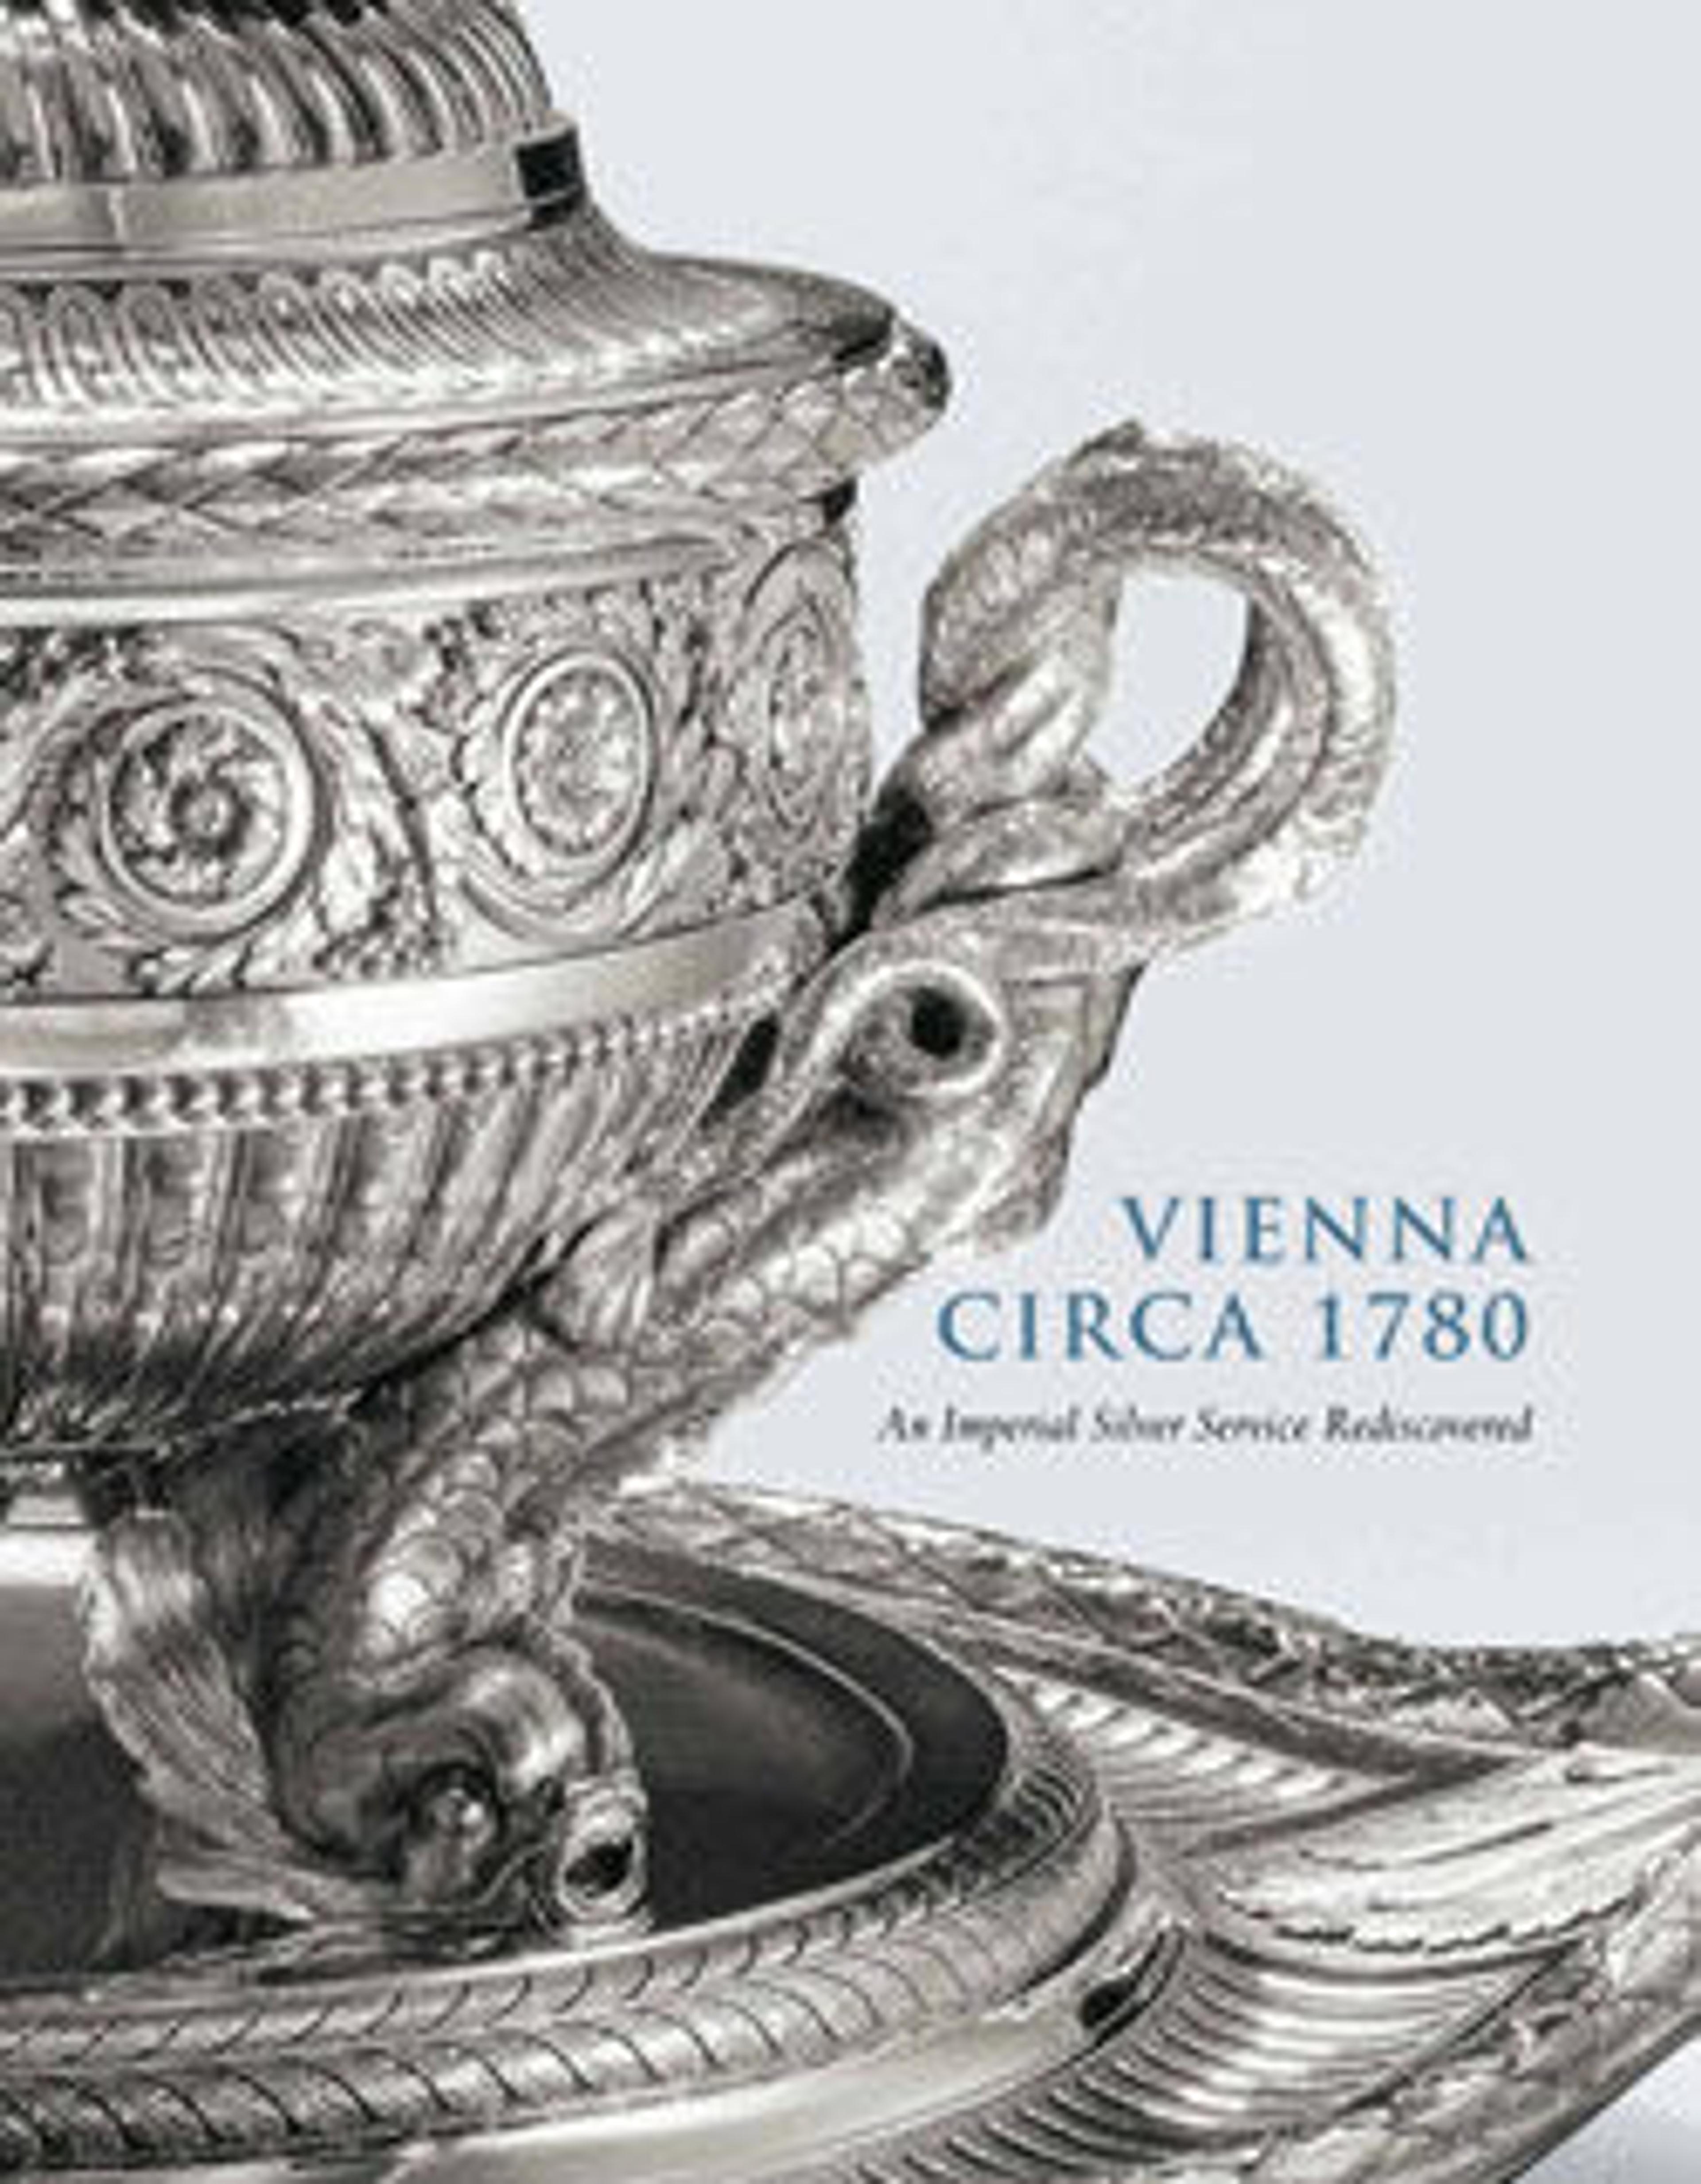 Vienna Circa 1780: An Imperial Silver Service Rediscovered